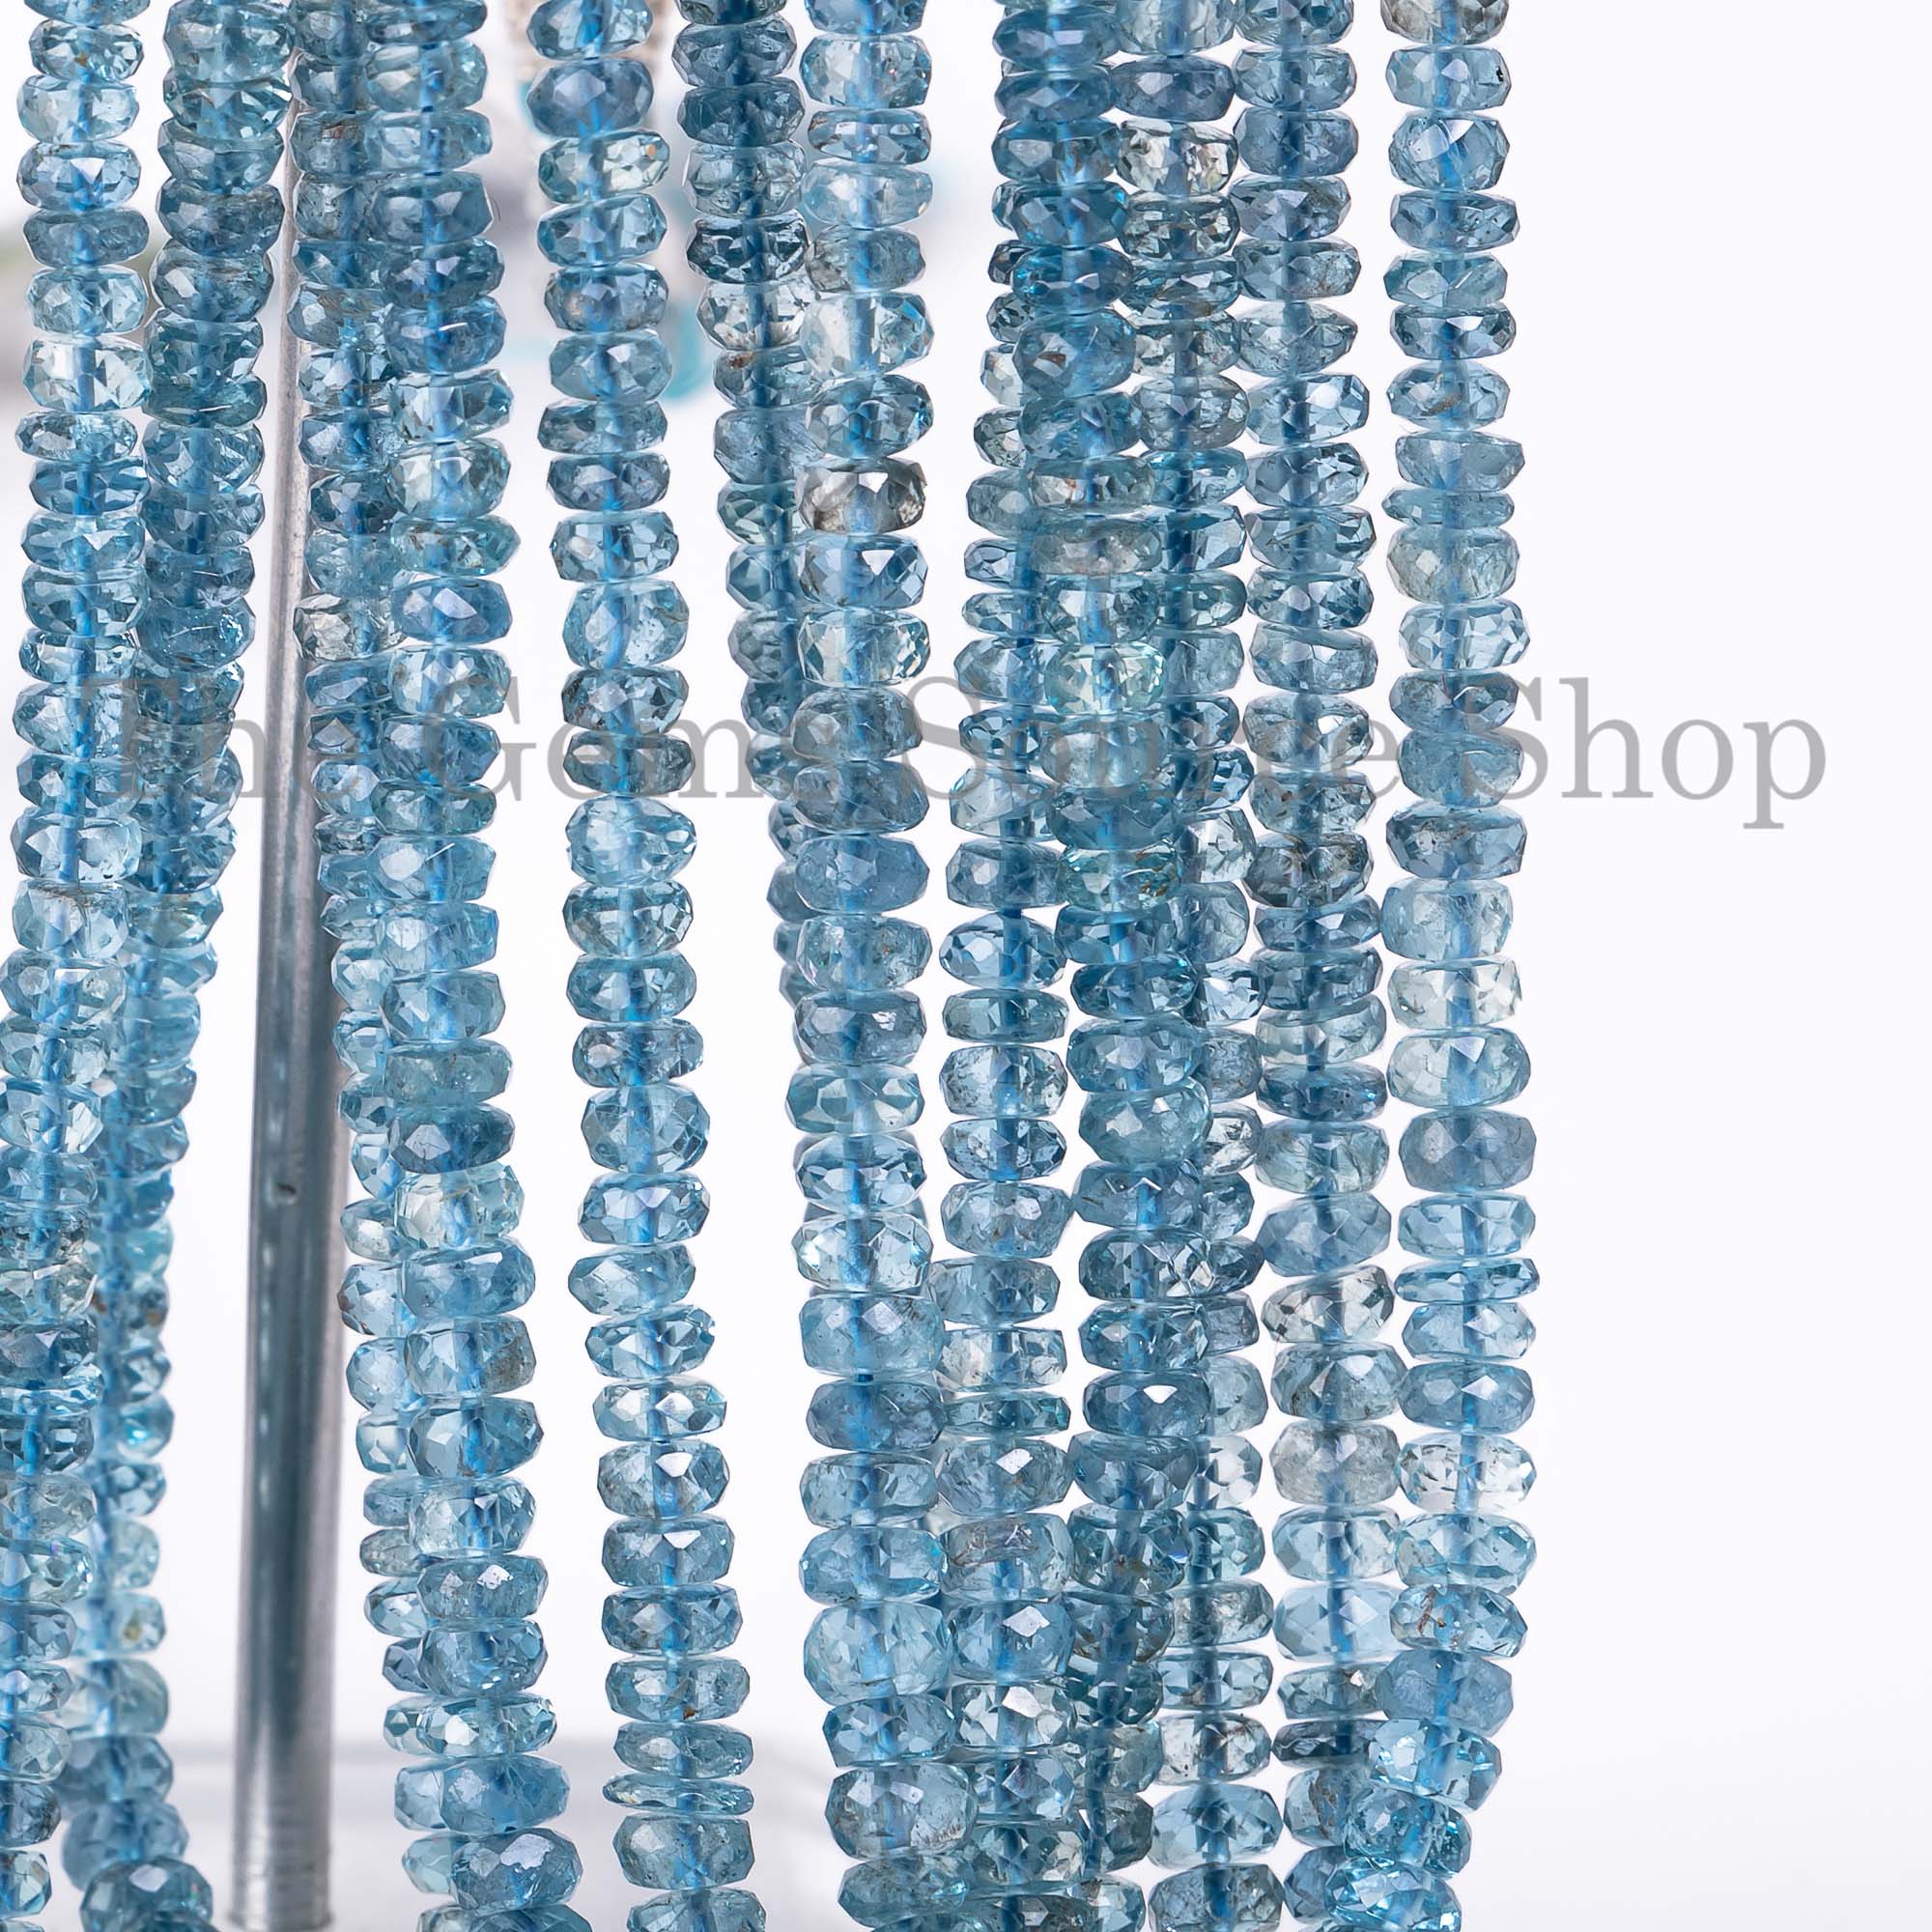 AAA Quality Extremely Rare Santa Maria Aquamarine Faceted Rondelle Precious Necklace, Aquamarine Rondelle Beads, Aquamarine Faceted Beads